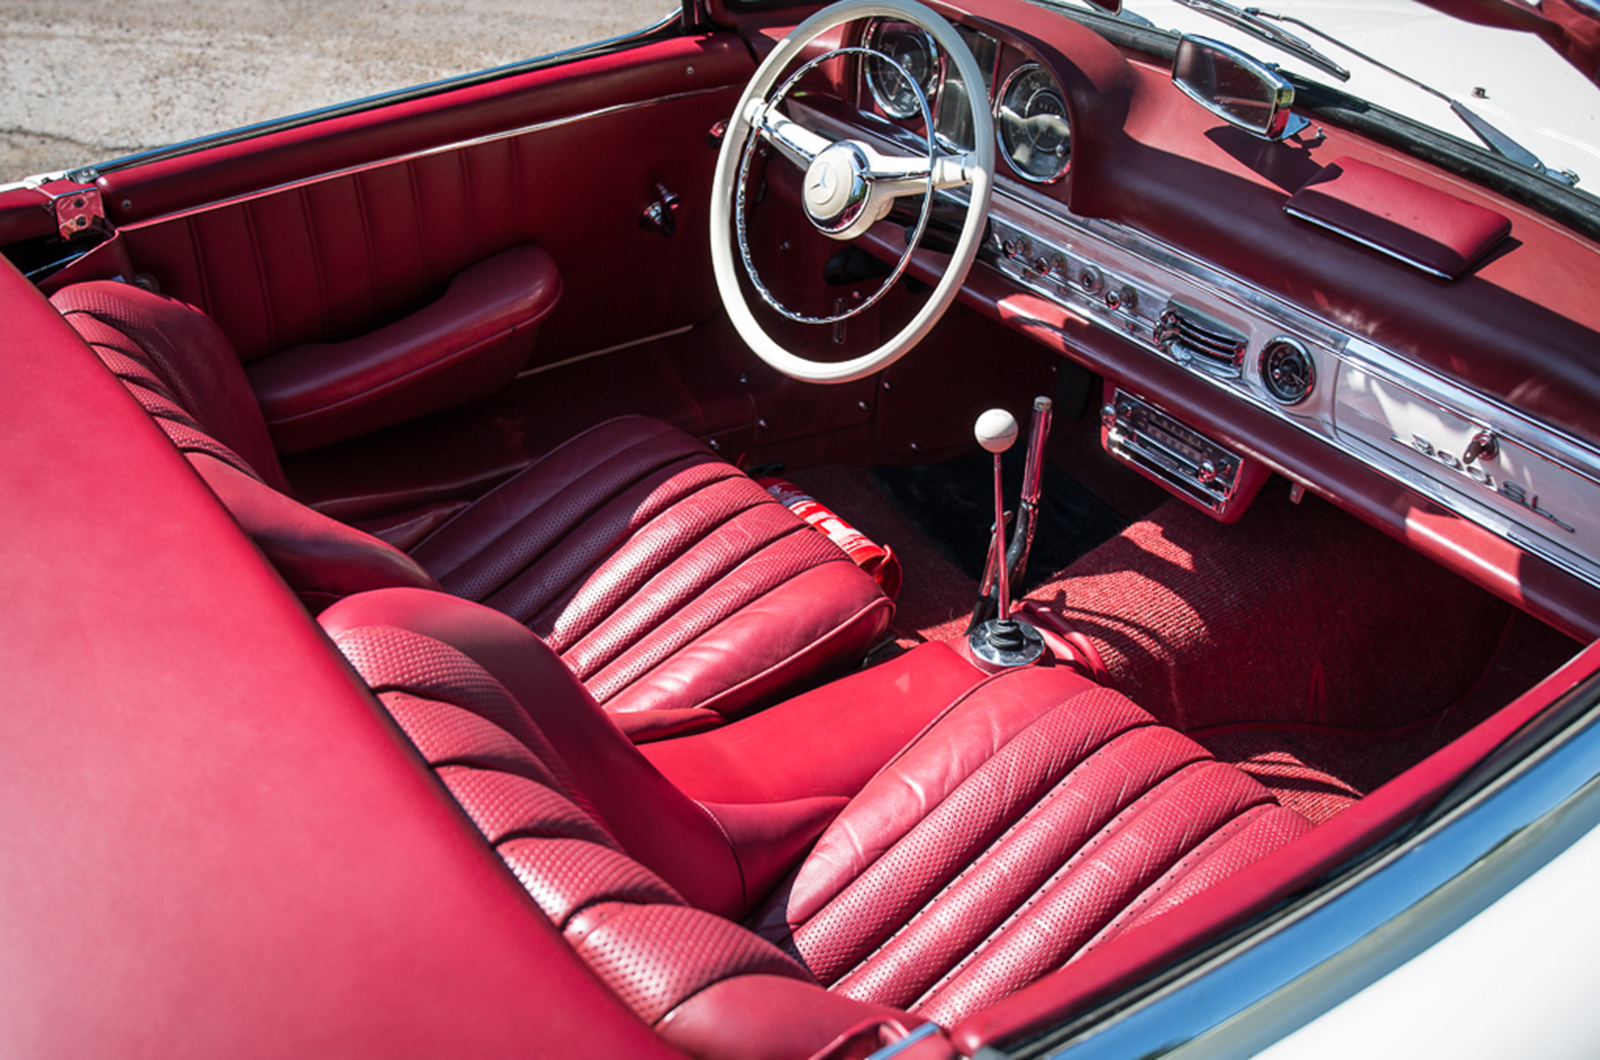 300SL Roadster revealed as the first entry to the Silverstone Classic Sale – Classic & Sports Car